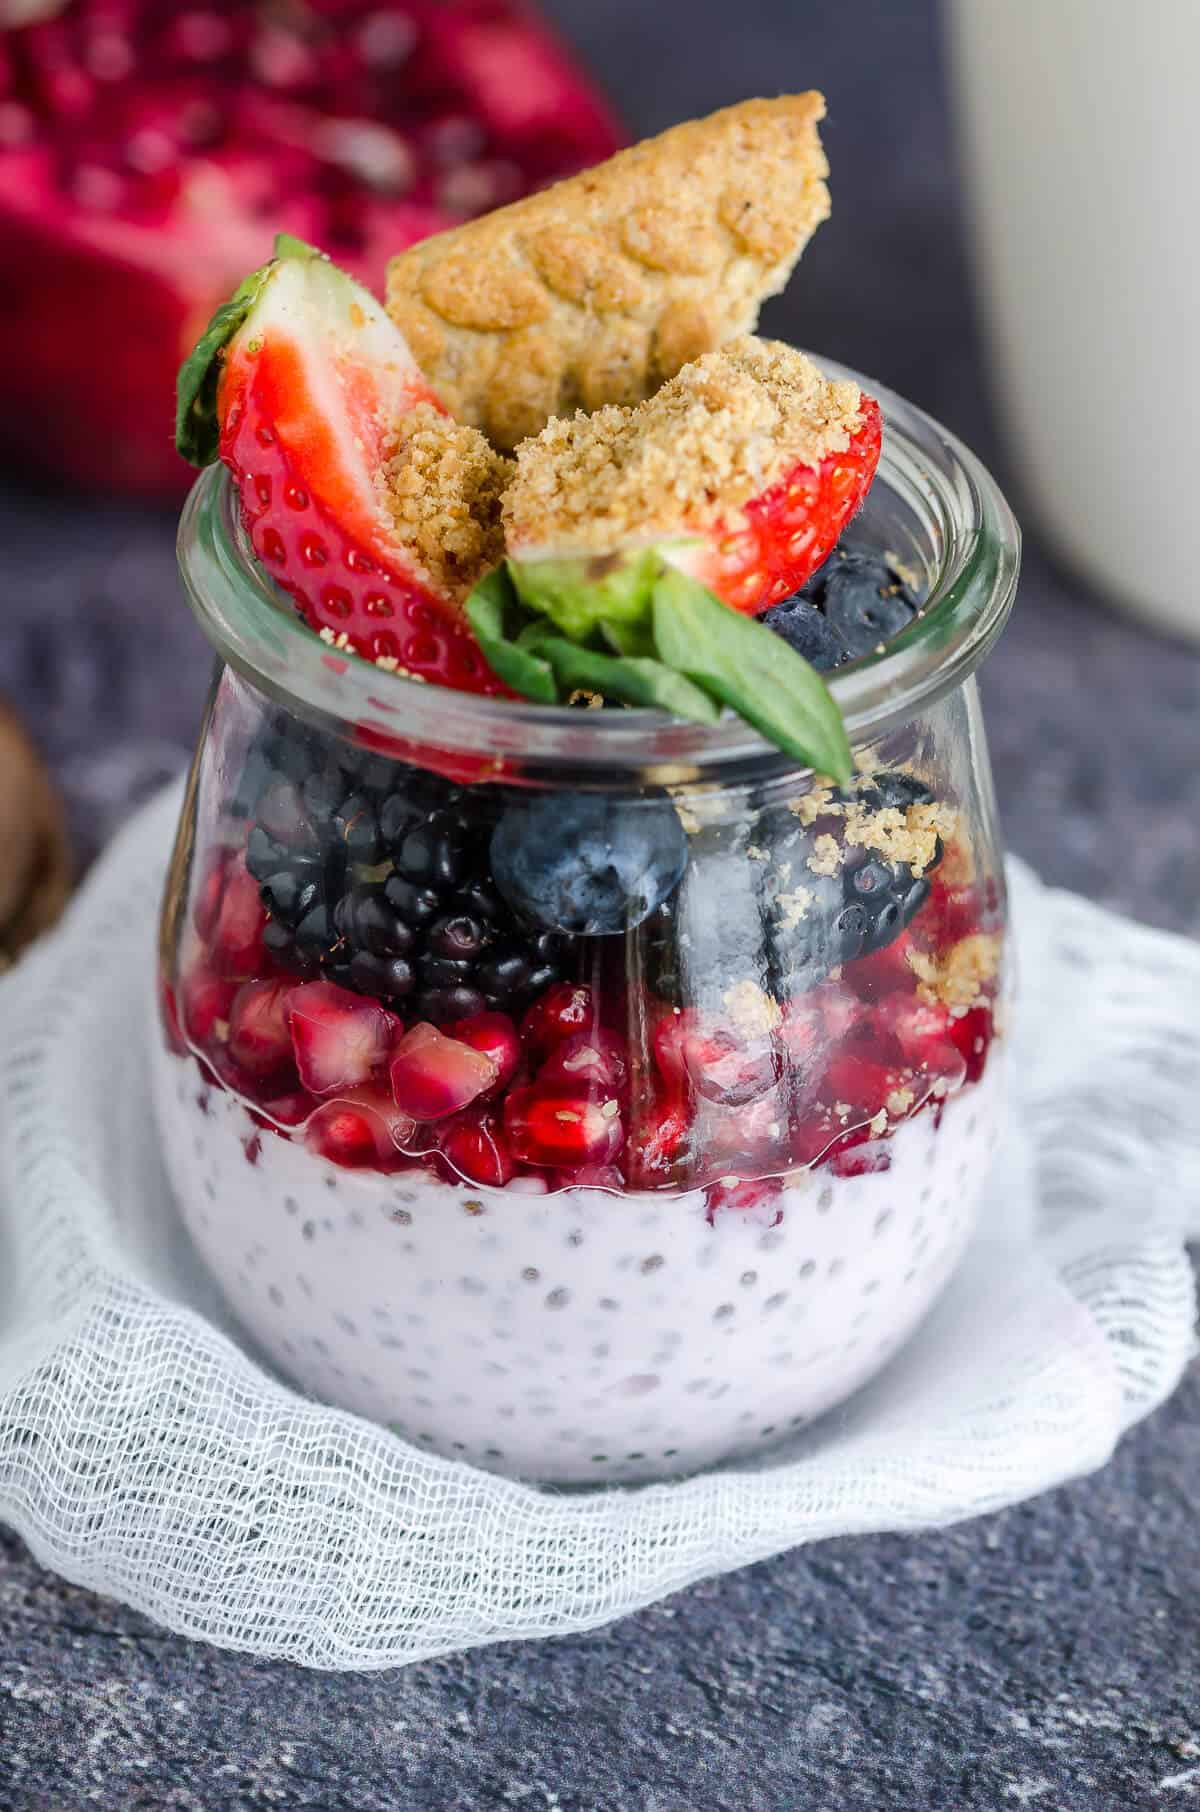 glass jar layered with chia seed pudding, pomegranate arils, blackberries, blueberries, strawberries, and crumbled belVita breakfast biscuit